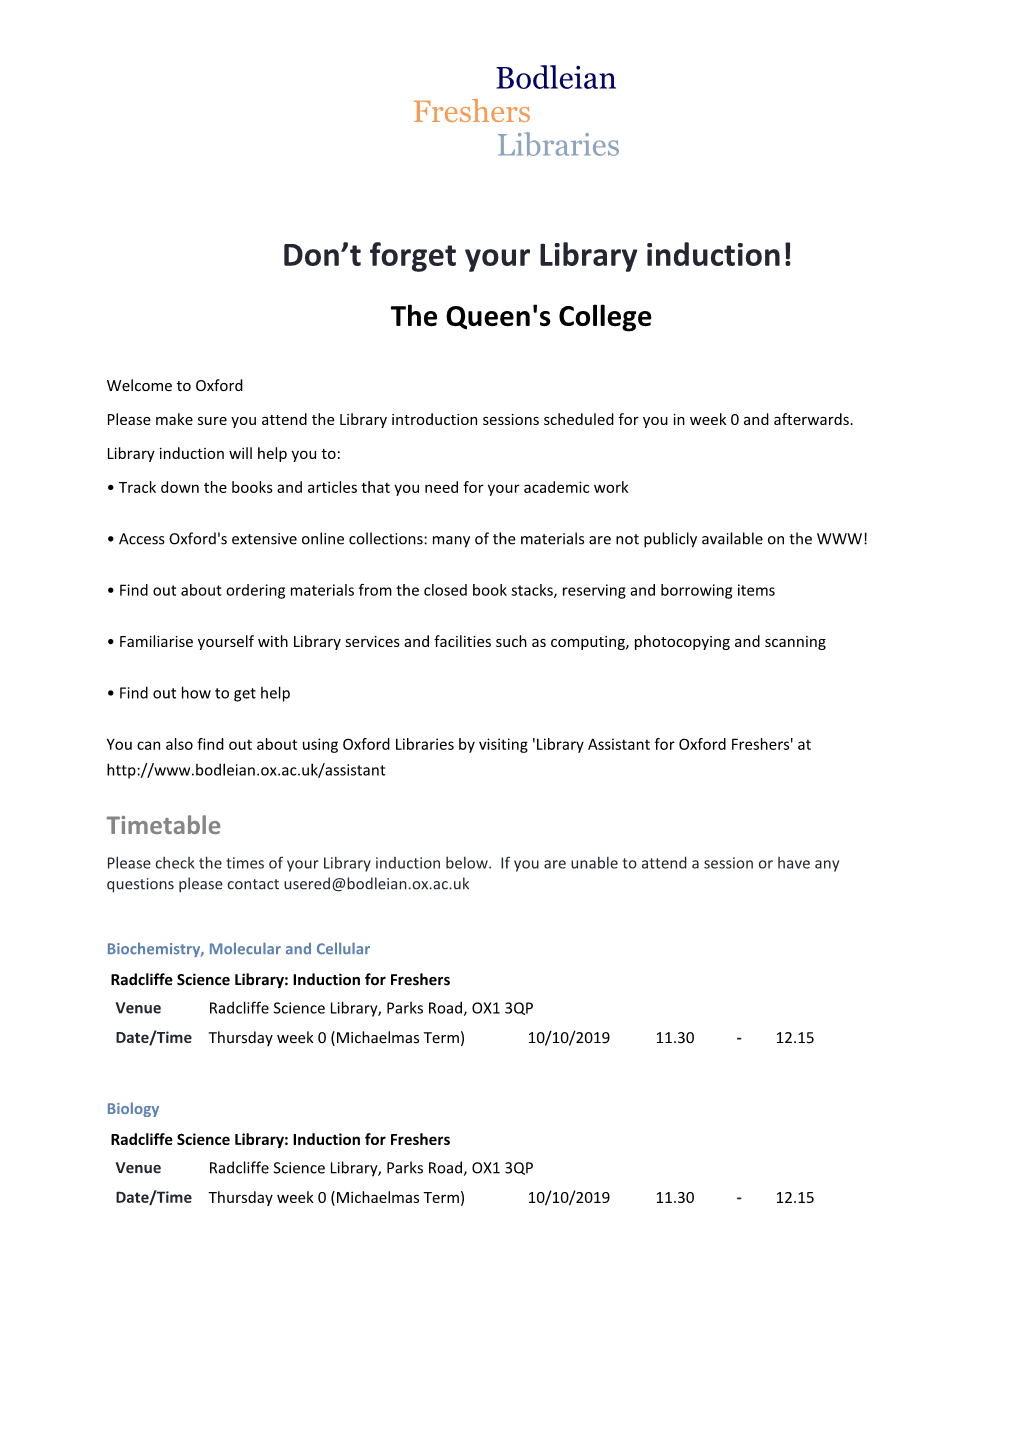 Don't Forget Your Library Induction!